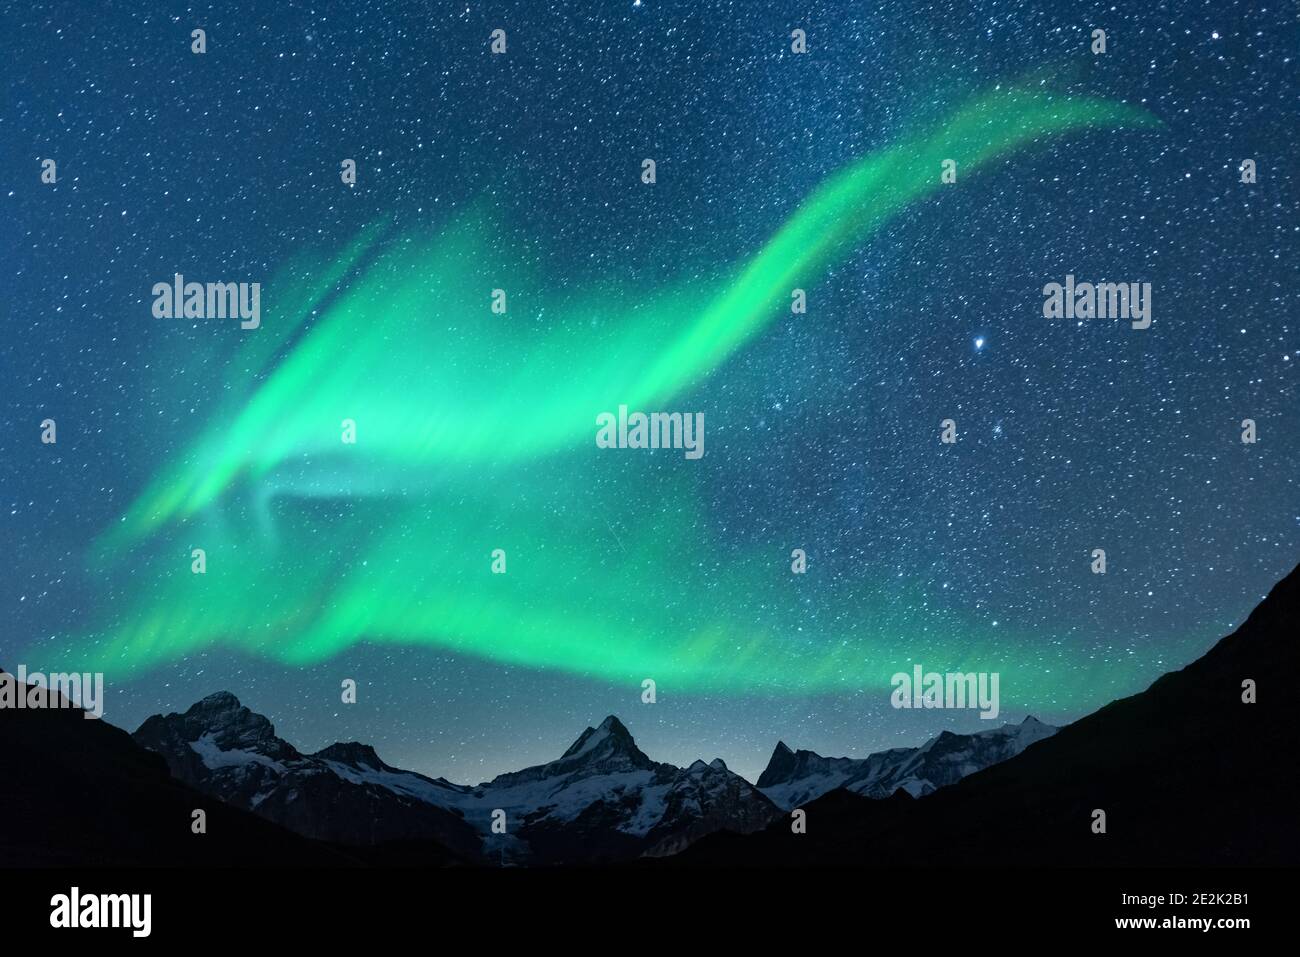 Aurora borealis. Northern lights in winter mountains. Sky with polar lights and stars Stock Photo